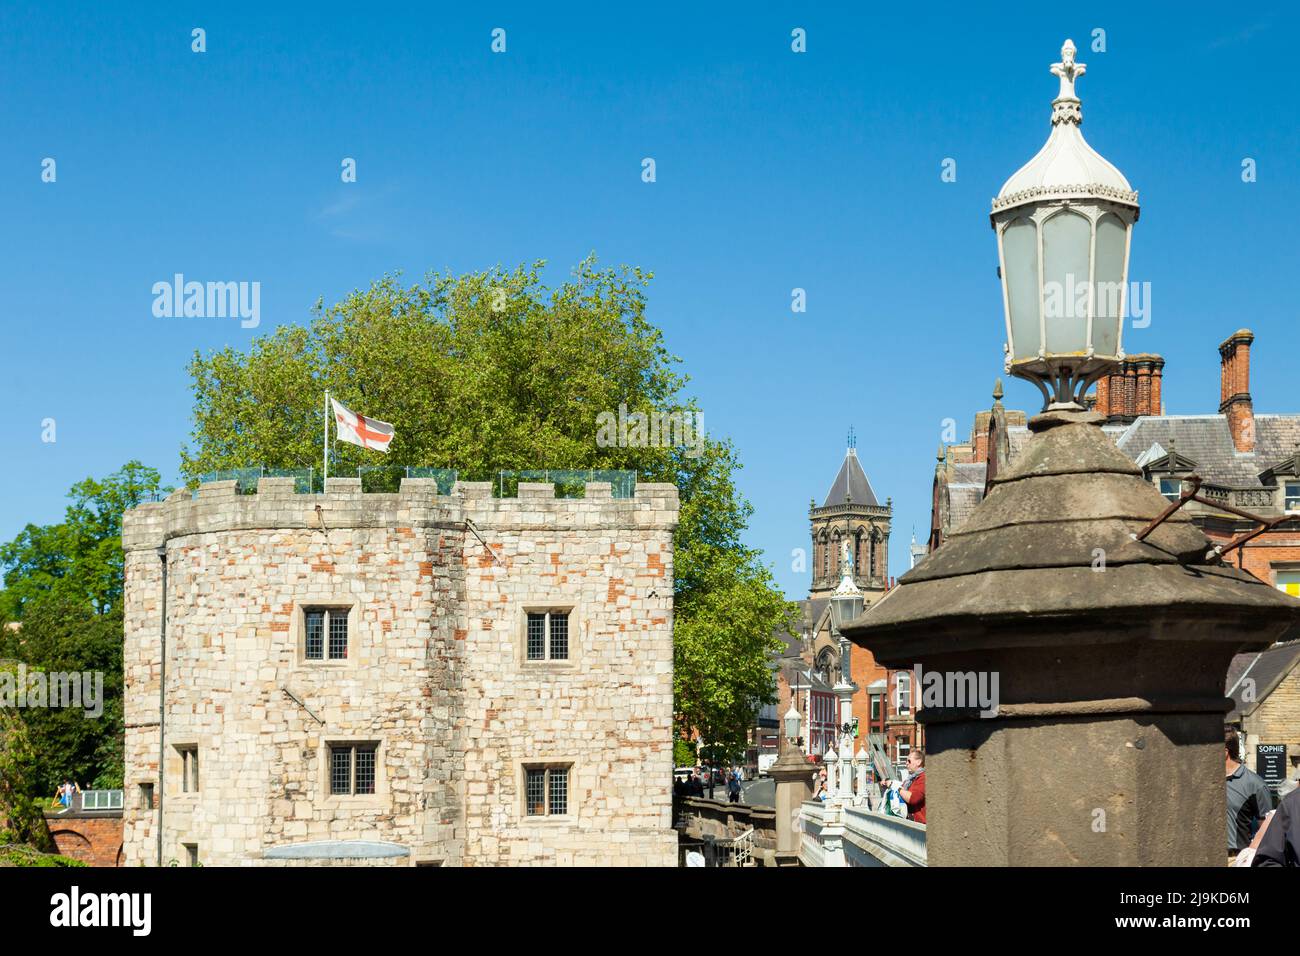 Spring afternoon at Lendal Tower in York city centre, England. Stock Photo